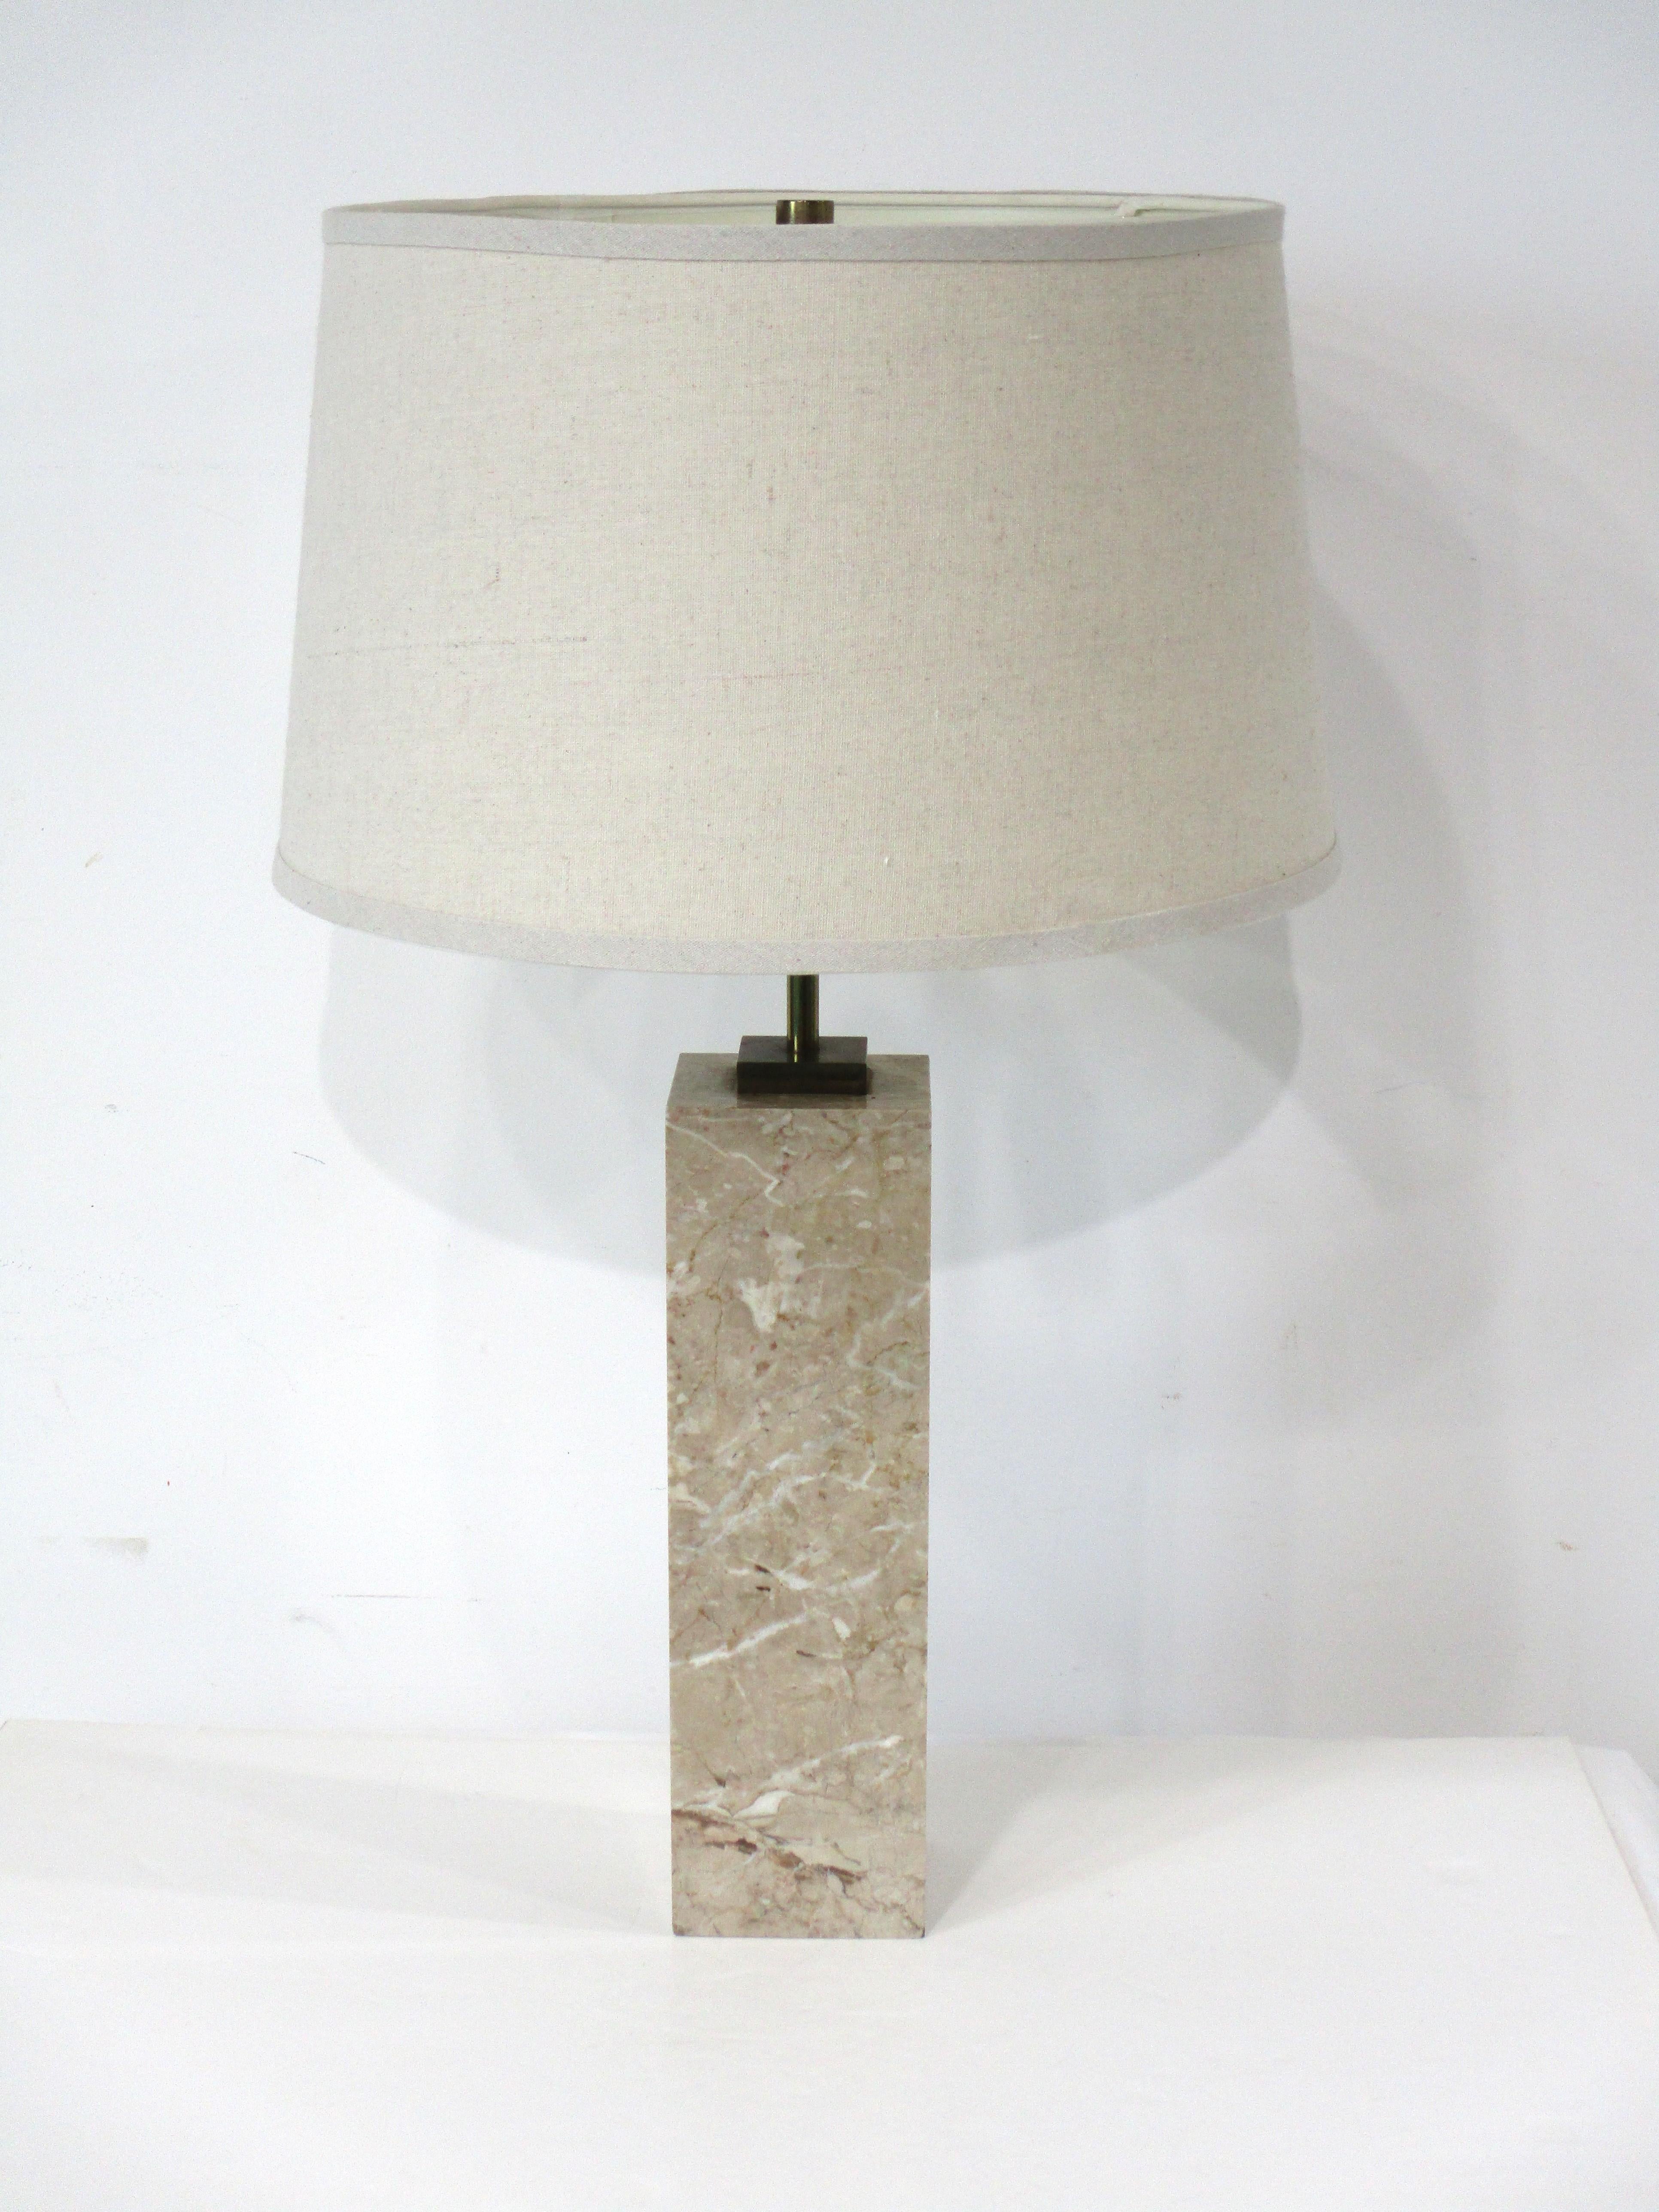 A squared marble based table lamp with great veining having brass upper detail and double sockets and pull chain switch . Topped with a woven lighter beige barrel shade giving the piece a tailored and tight look . Designed by T.H. Robs John -